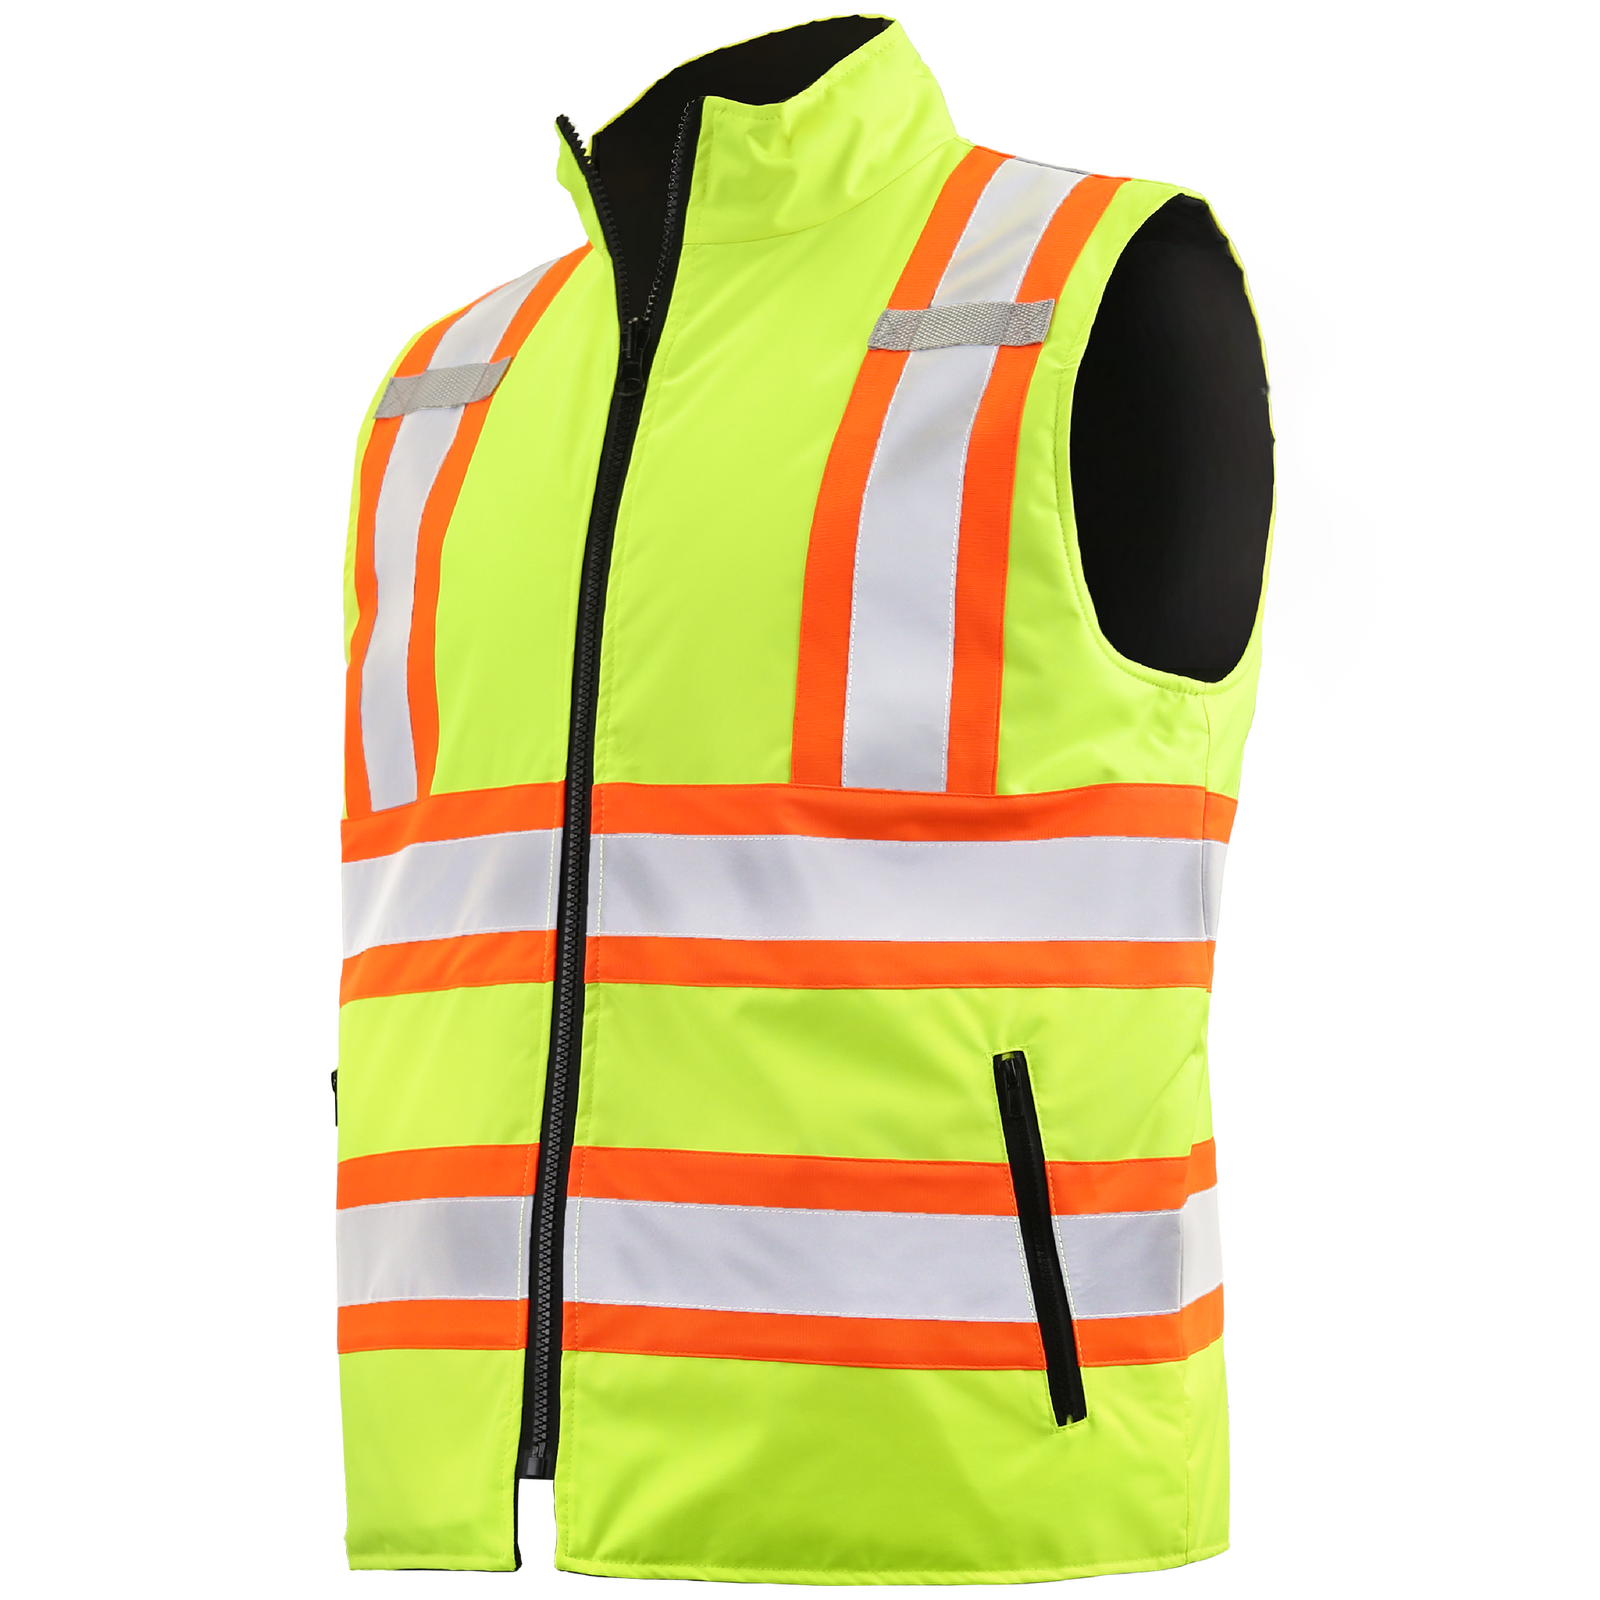 Diagonal view of the yellow JORESTECH vi-vis X on back reversible insulated safety vest with reflective strips